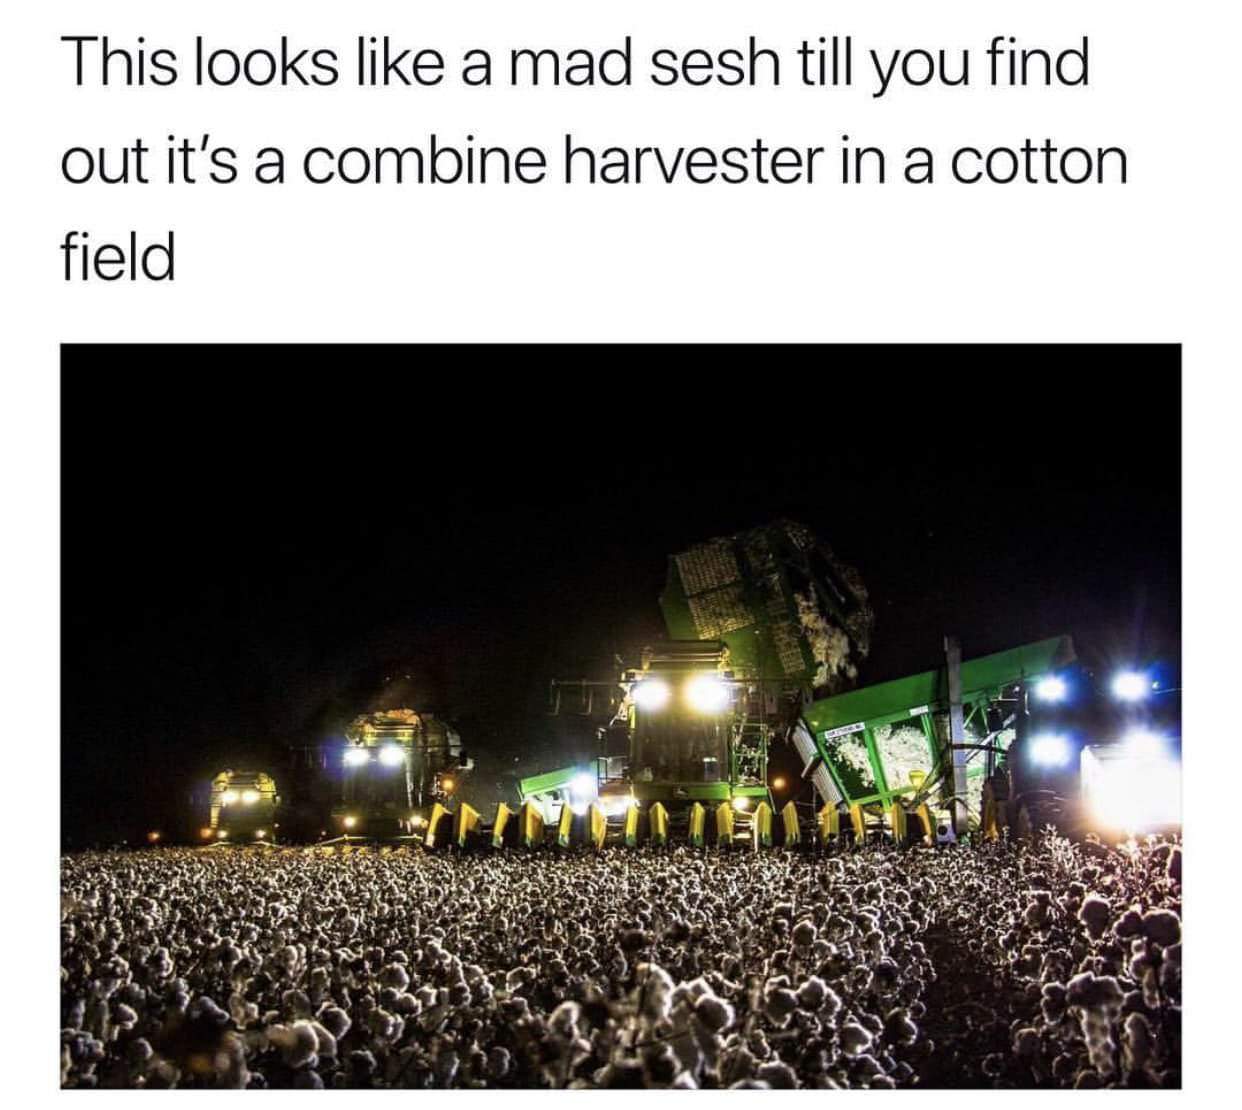 cotton field looks like concert - This looks a mad sesh till you find out it's a combine harvester in a cotton field